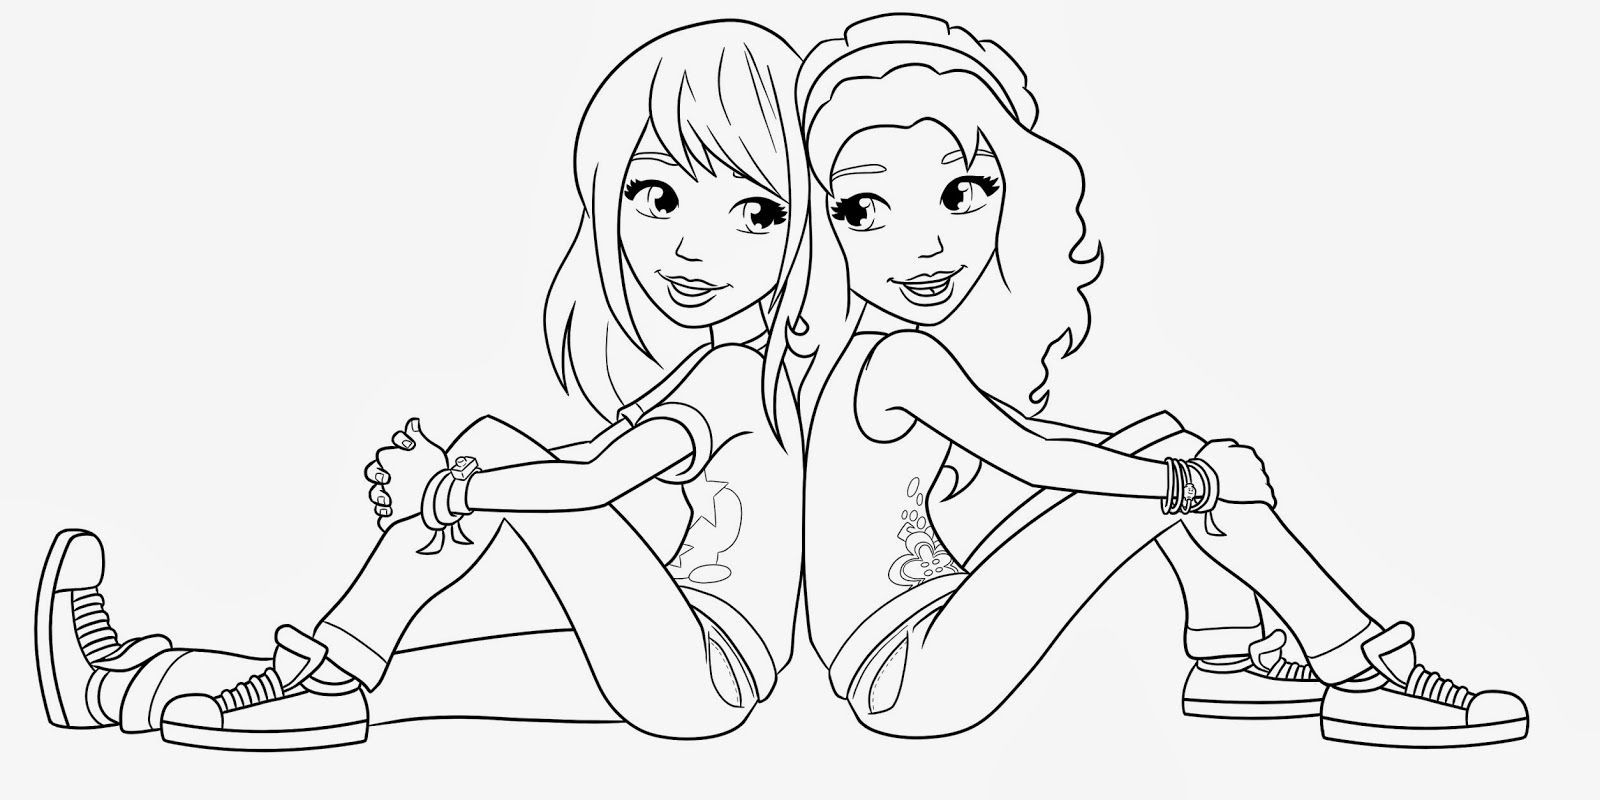 Best Friend Coloring Pages For Girls
 Lego Friends Coloring Pages Coloring Home